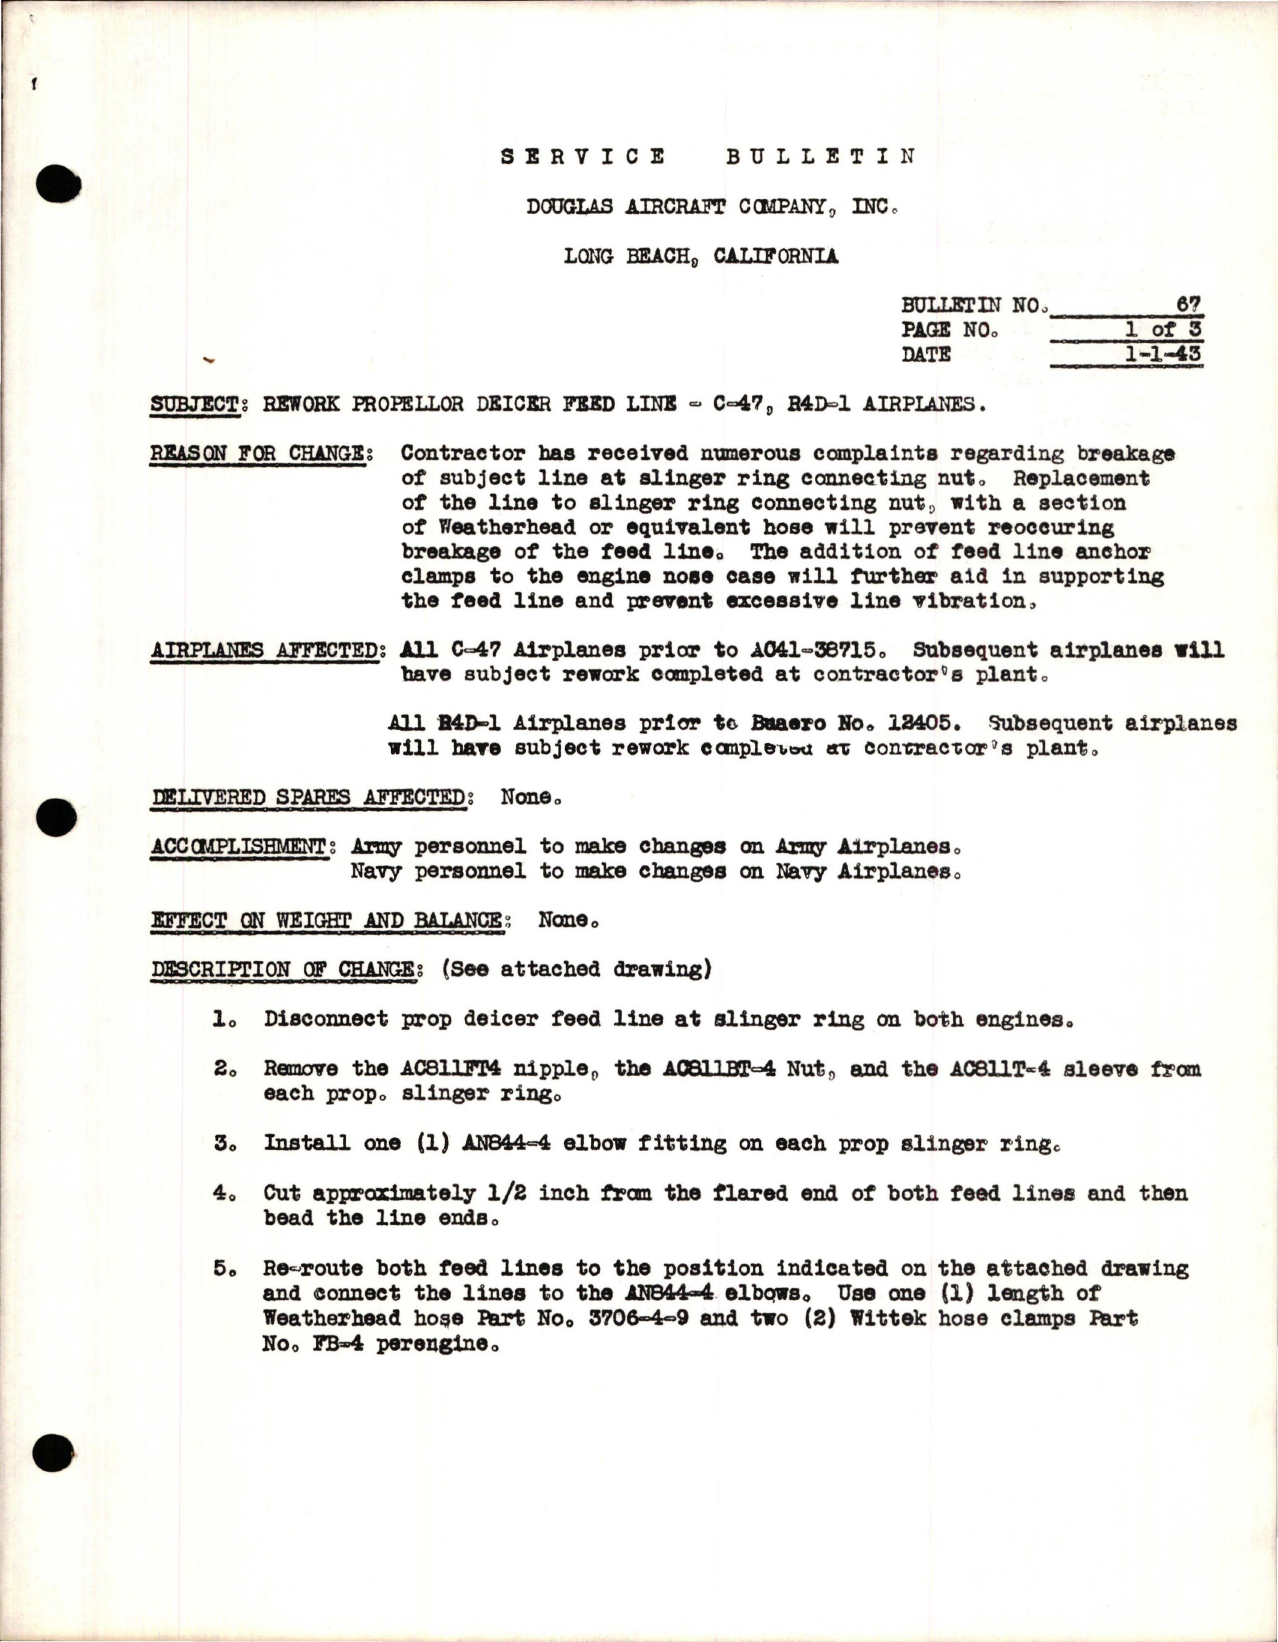 Sample page 1 from AirCorps Library document: Rework Propeller Deicer Feed Line